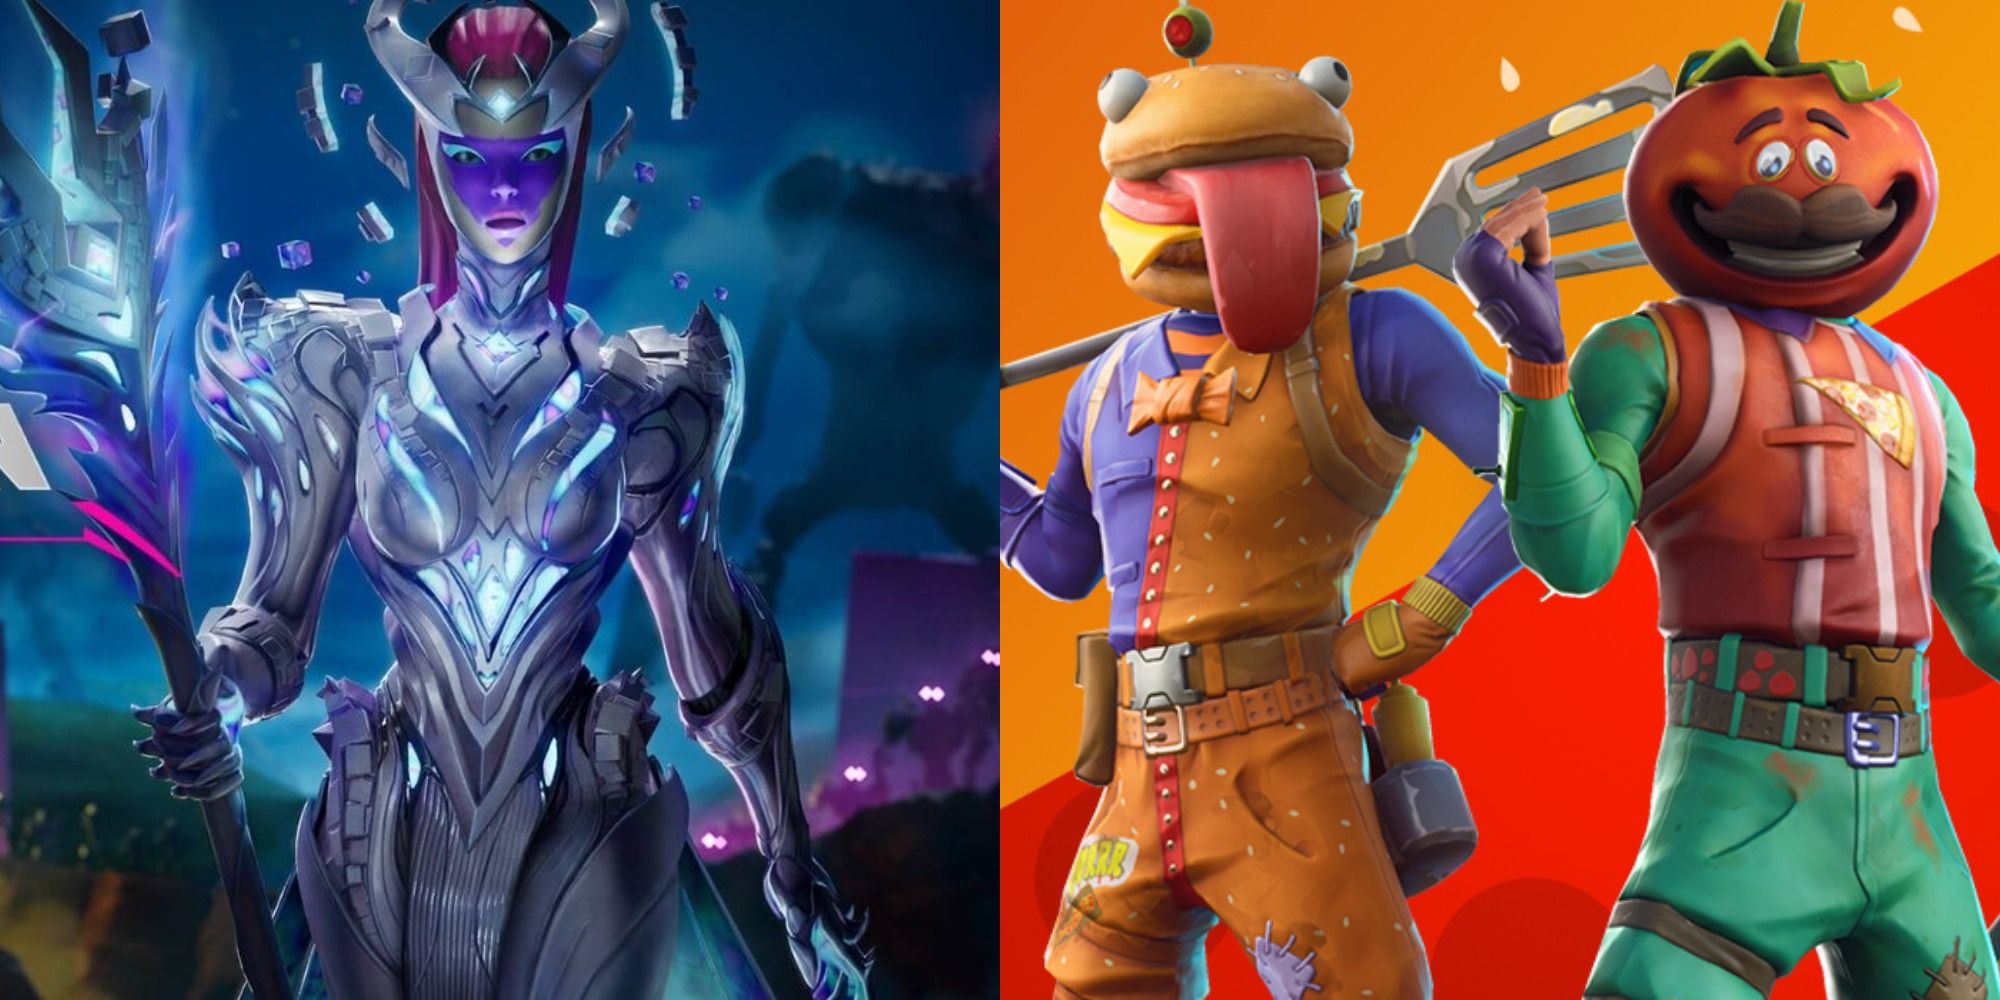 Split image showing the Cube Queen and two characters with food-shaped heads in Fortnite